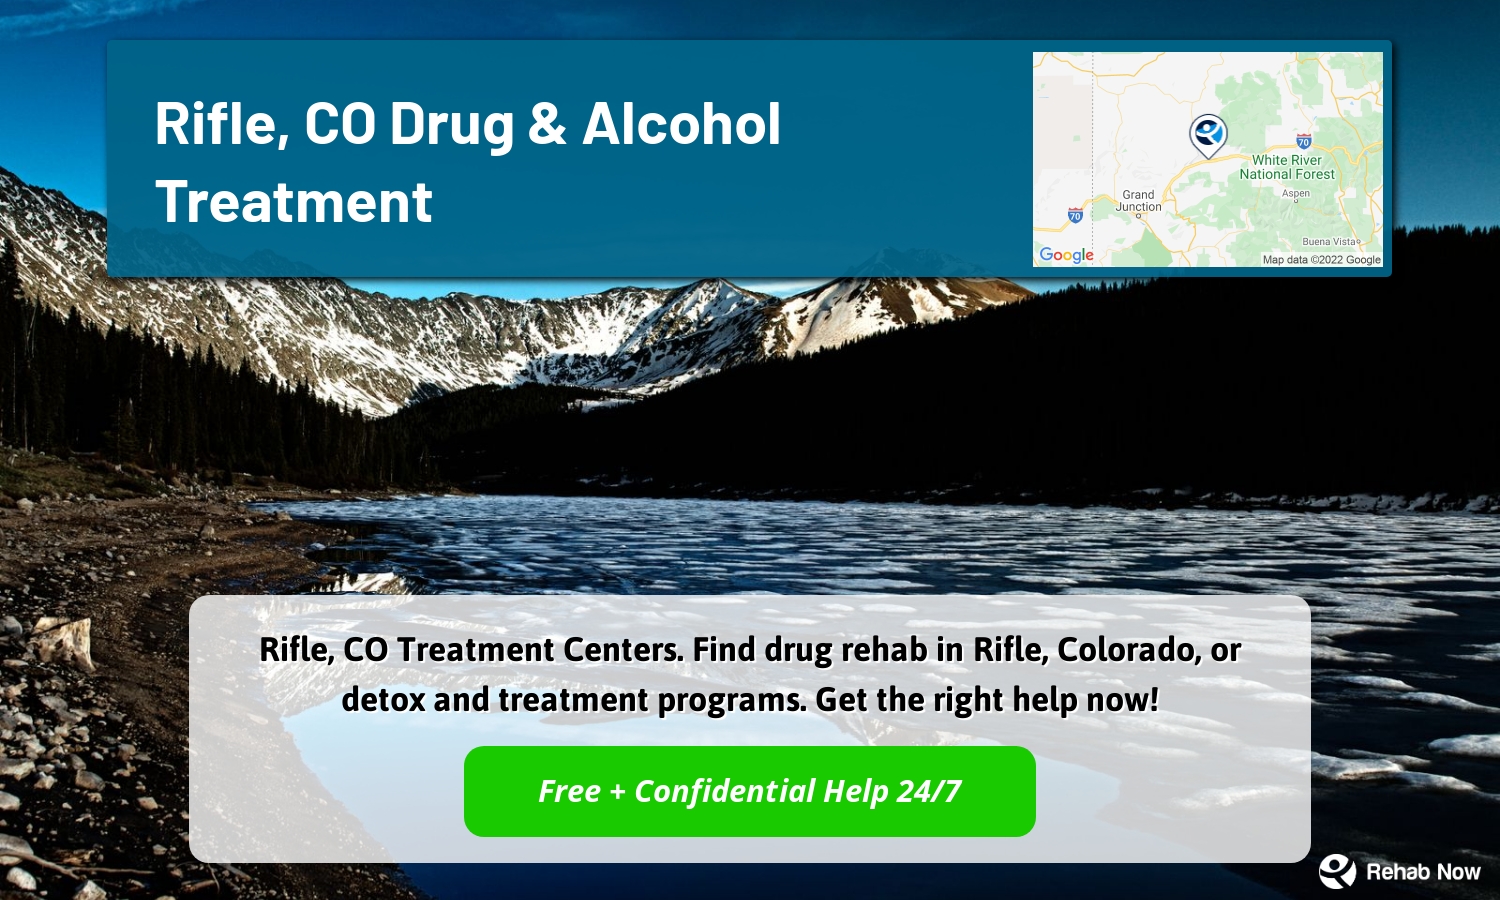 Rifle, CO Treatment Centers. Find drug rehab in Rifle, Colorado, or detox and treatment programs. Get the right help now!